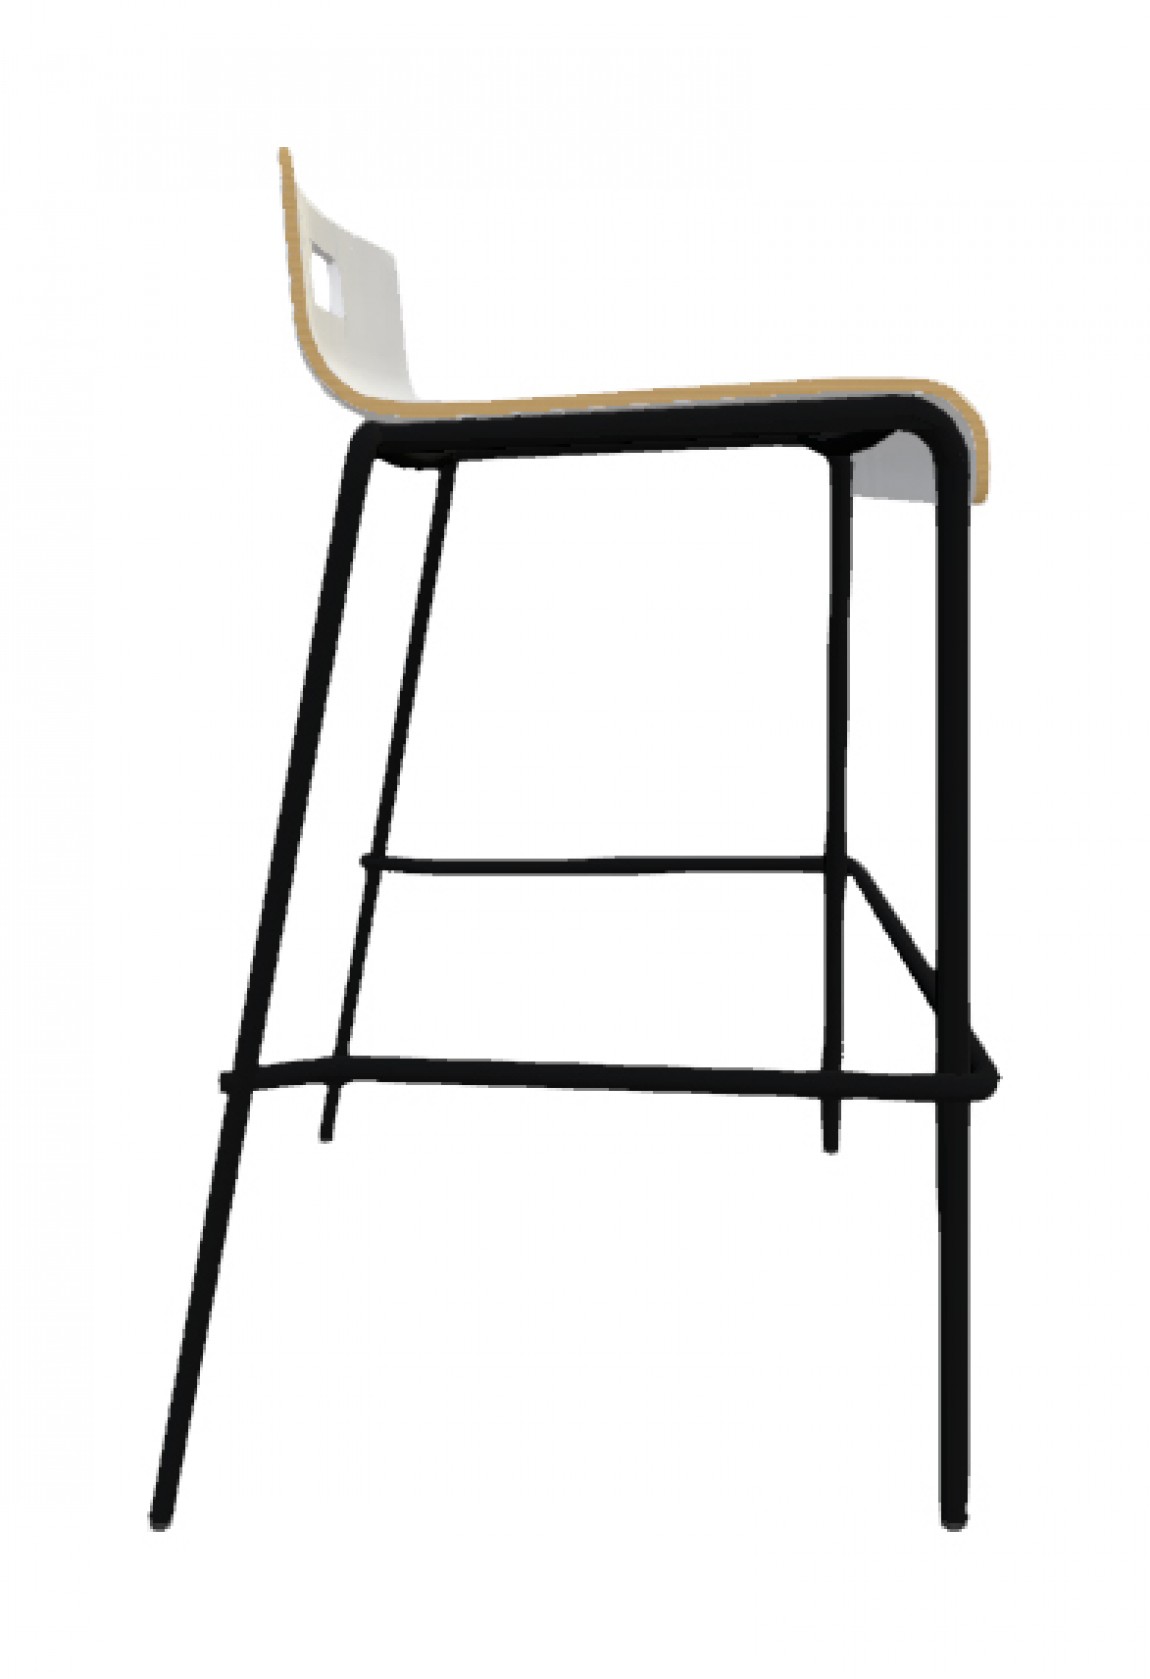 Counter-Height Stool